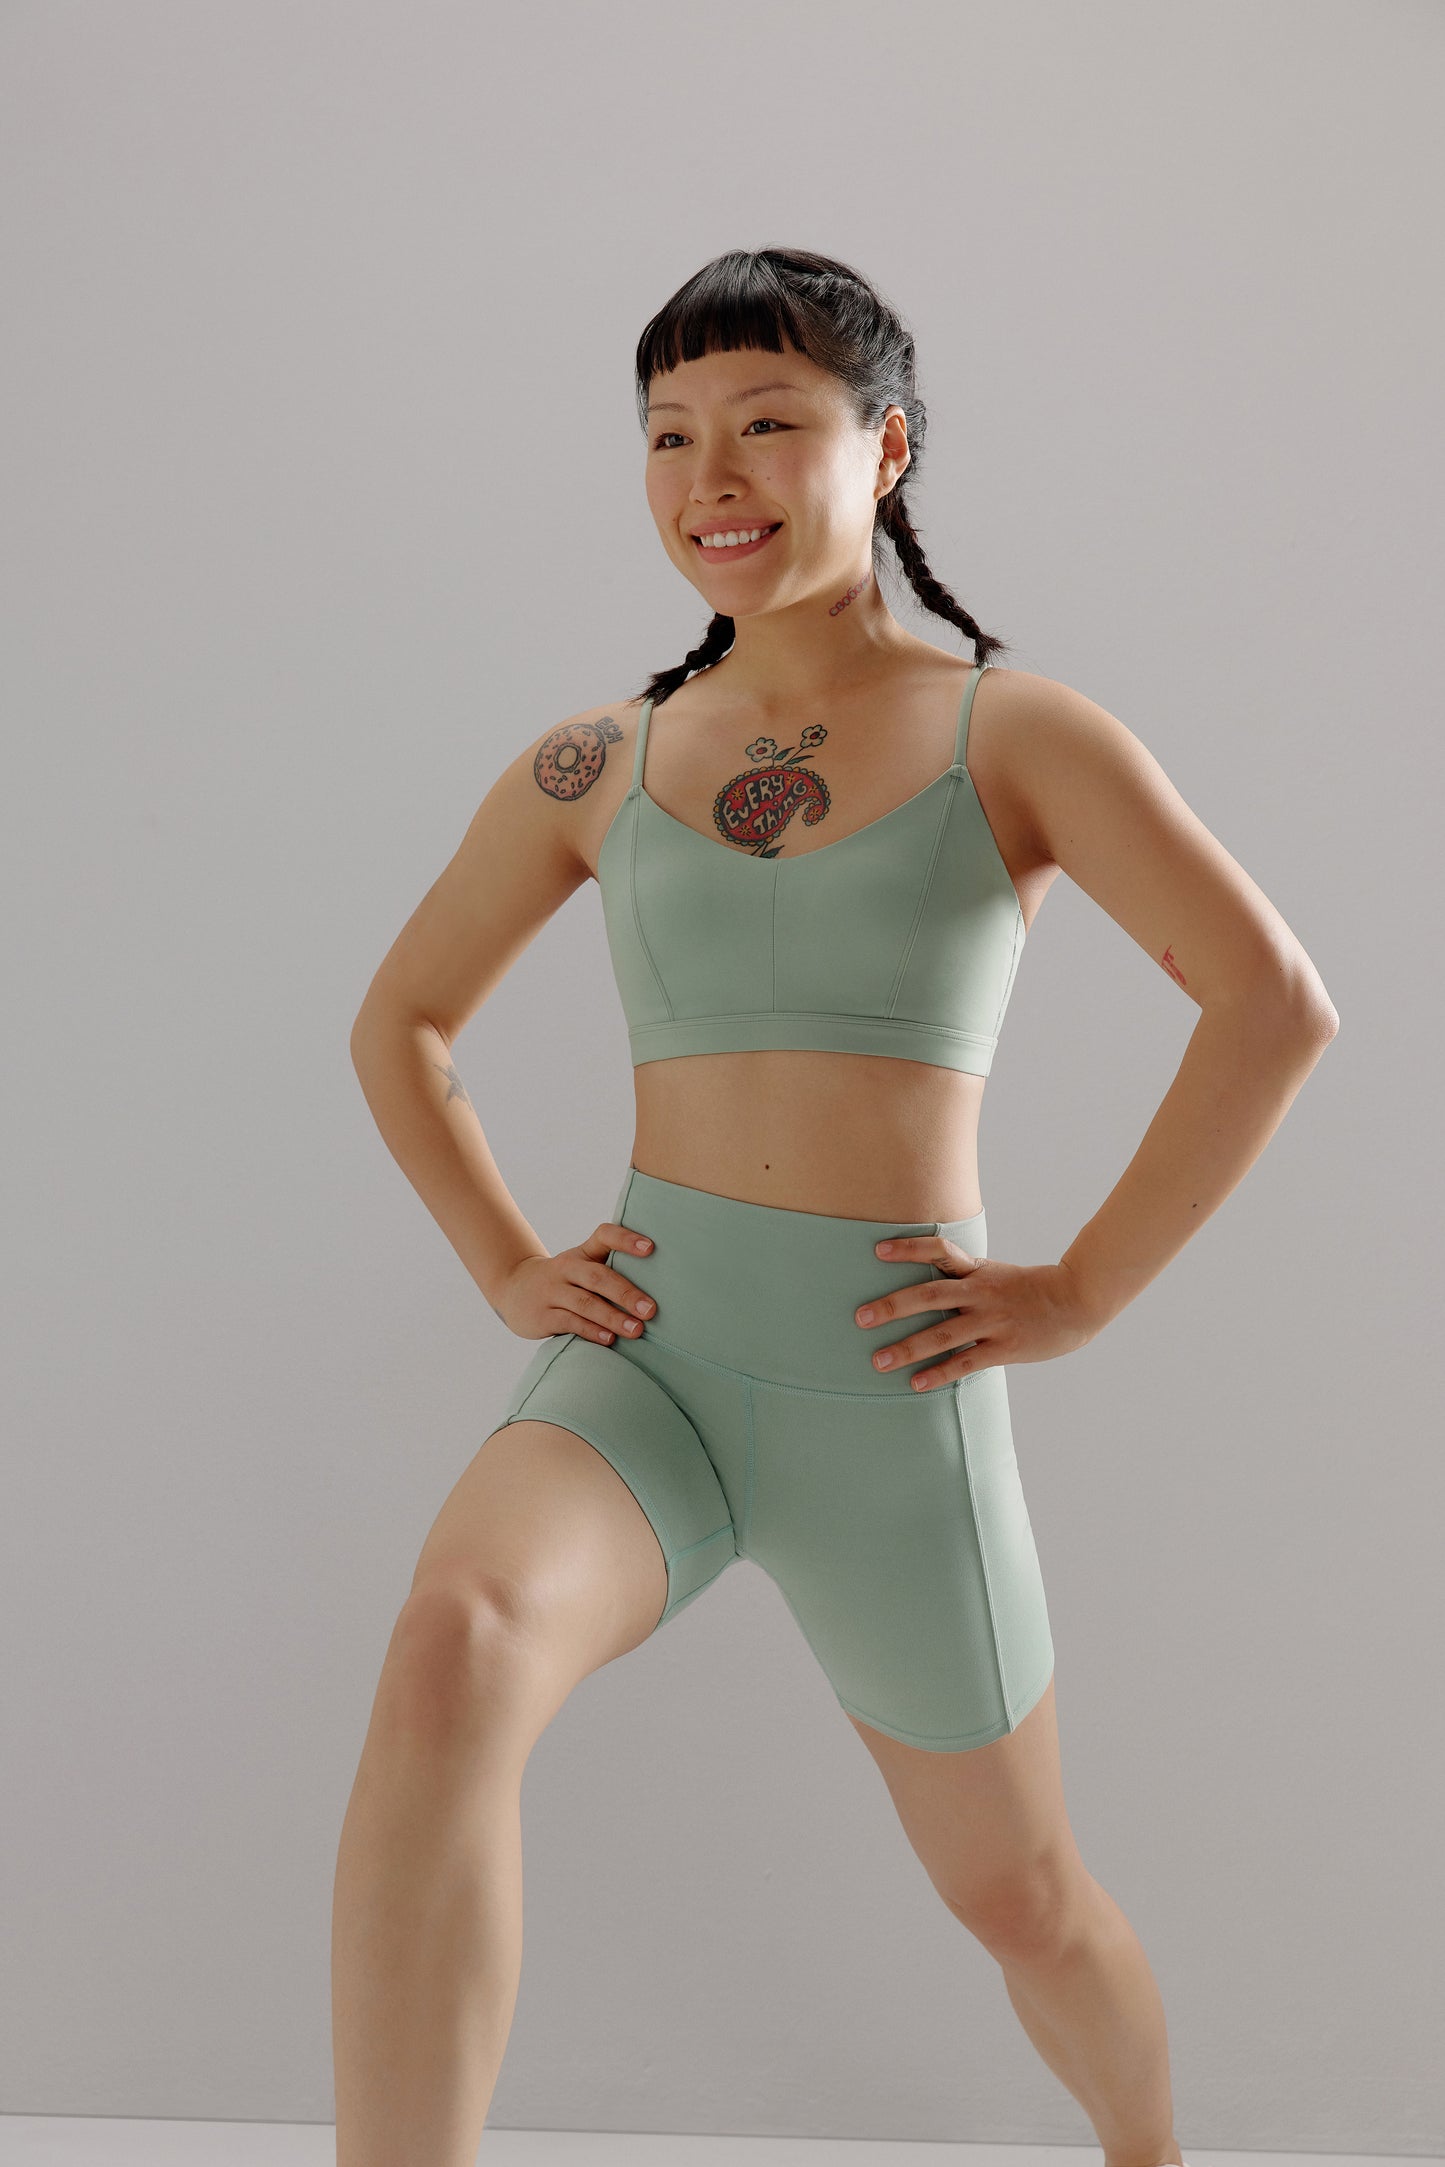 A woman wears a teal sports bra and shorts.